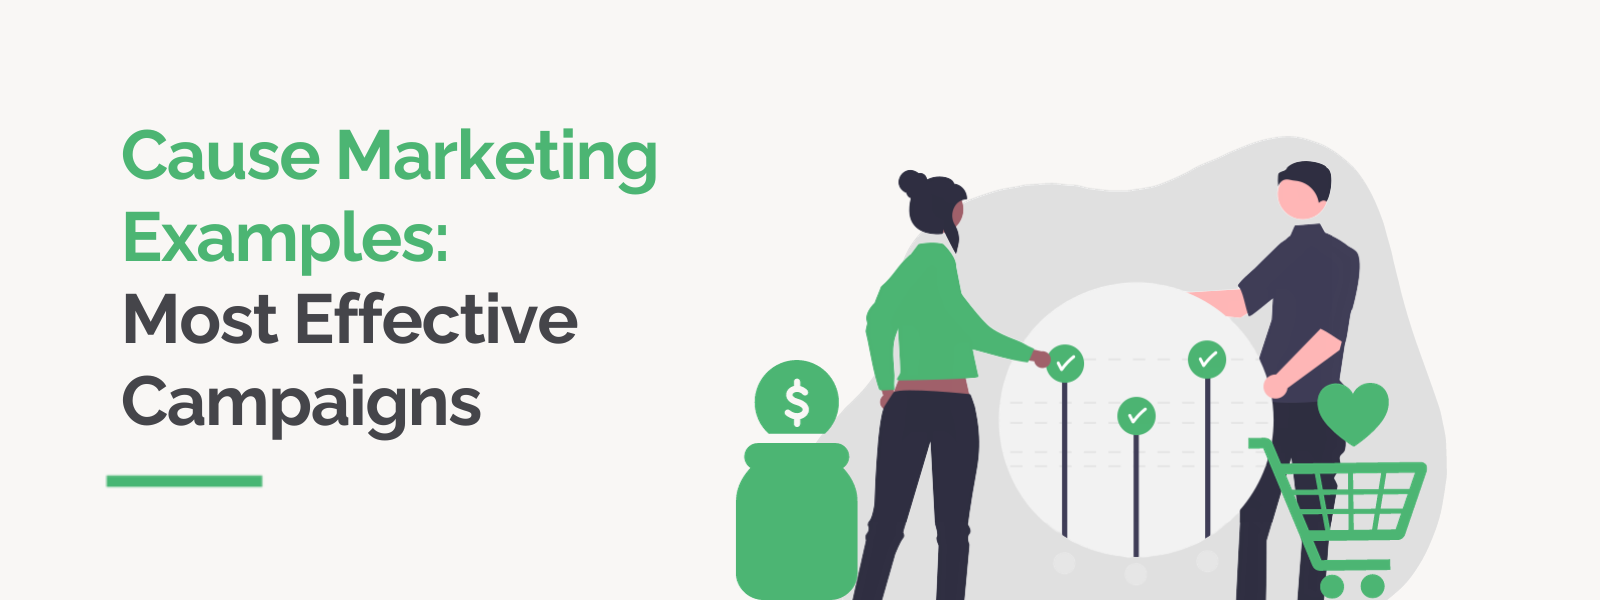 Cause Marketing Examples 14+ Effective Campaigns